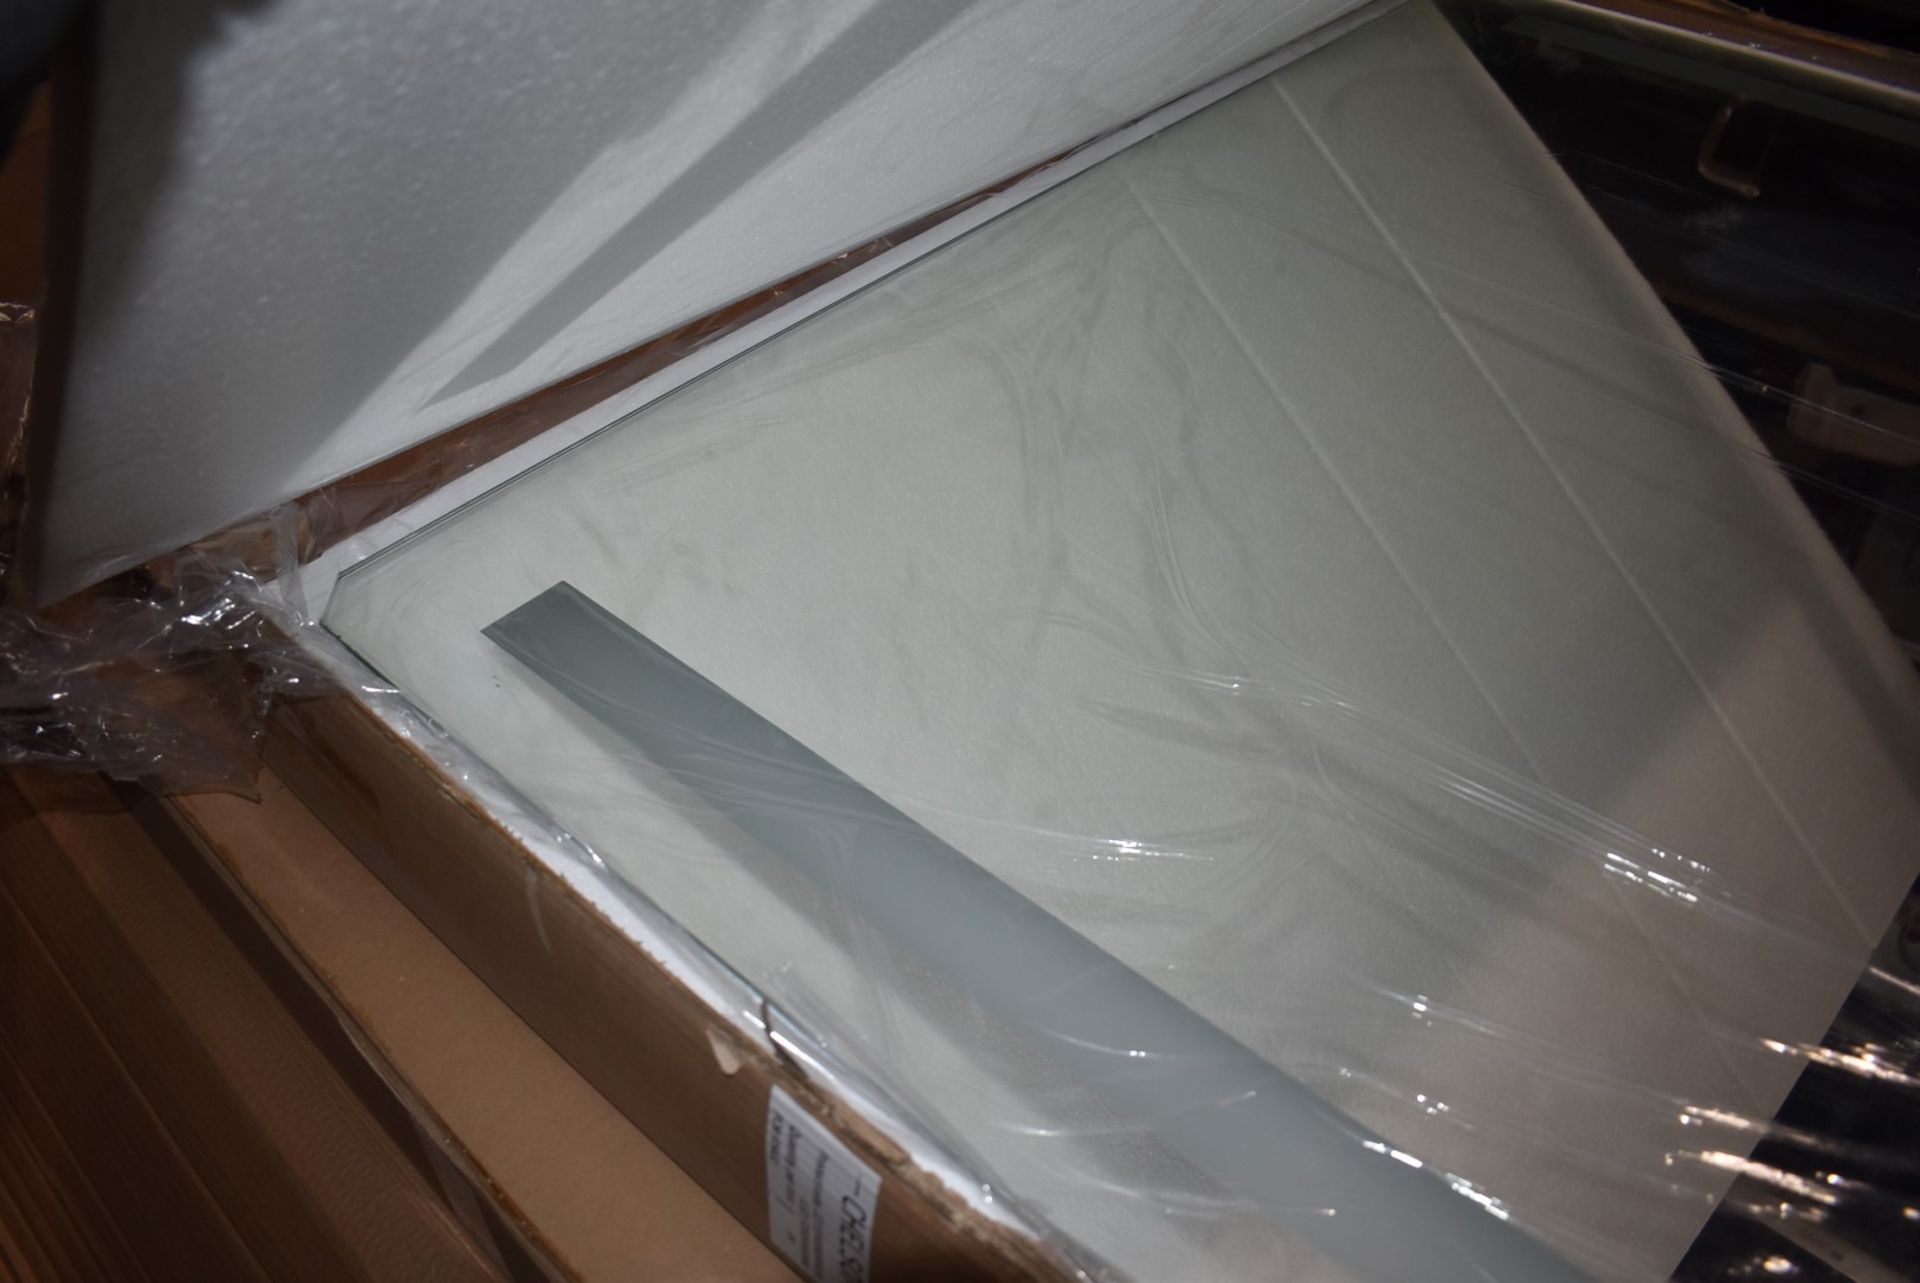 1 x Chelsom Large Illuminated LED Bathroom Mirror With Demister - Brand New Stock - As Used in Major - Image 9 of 10